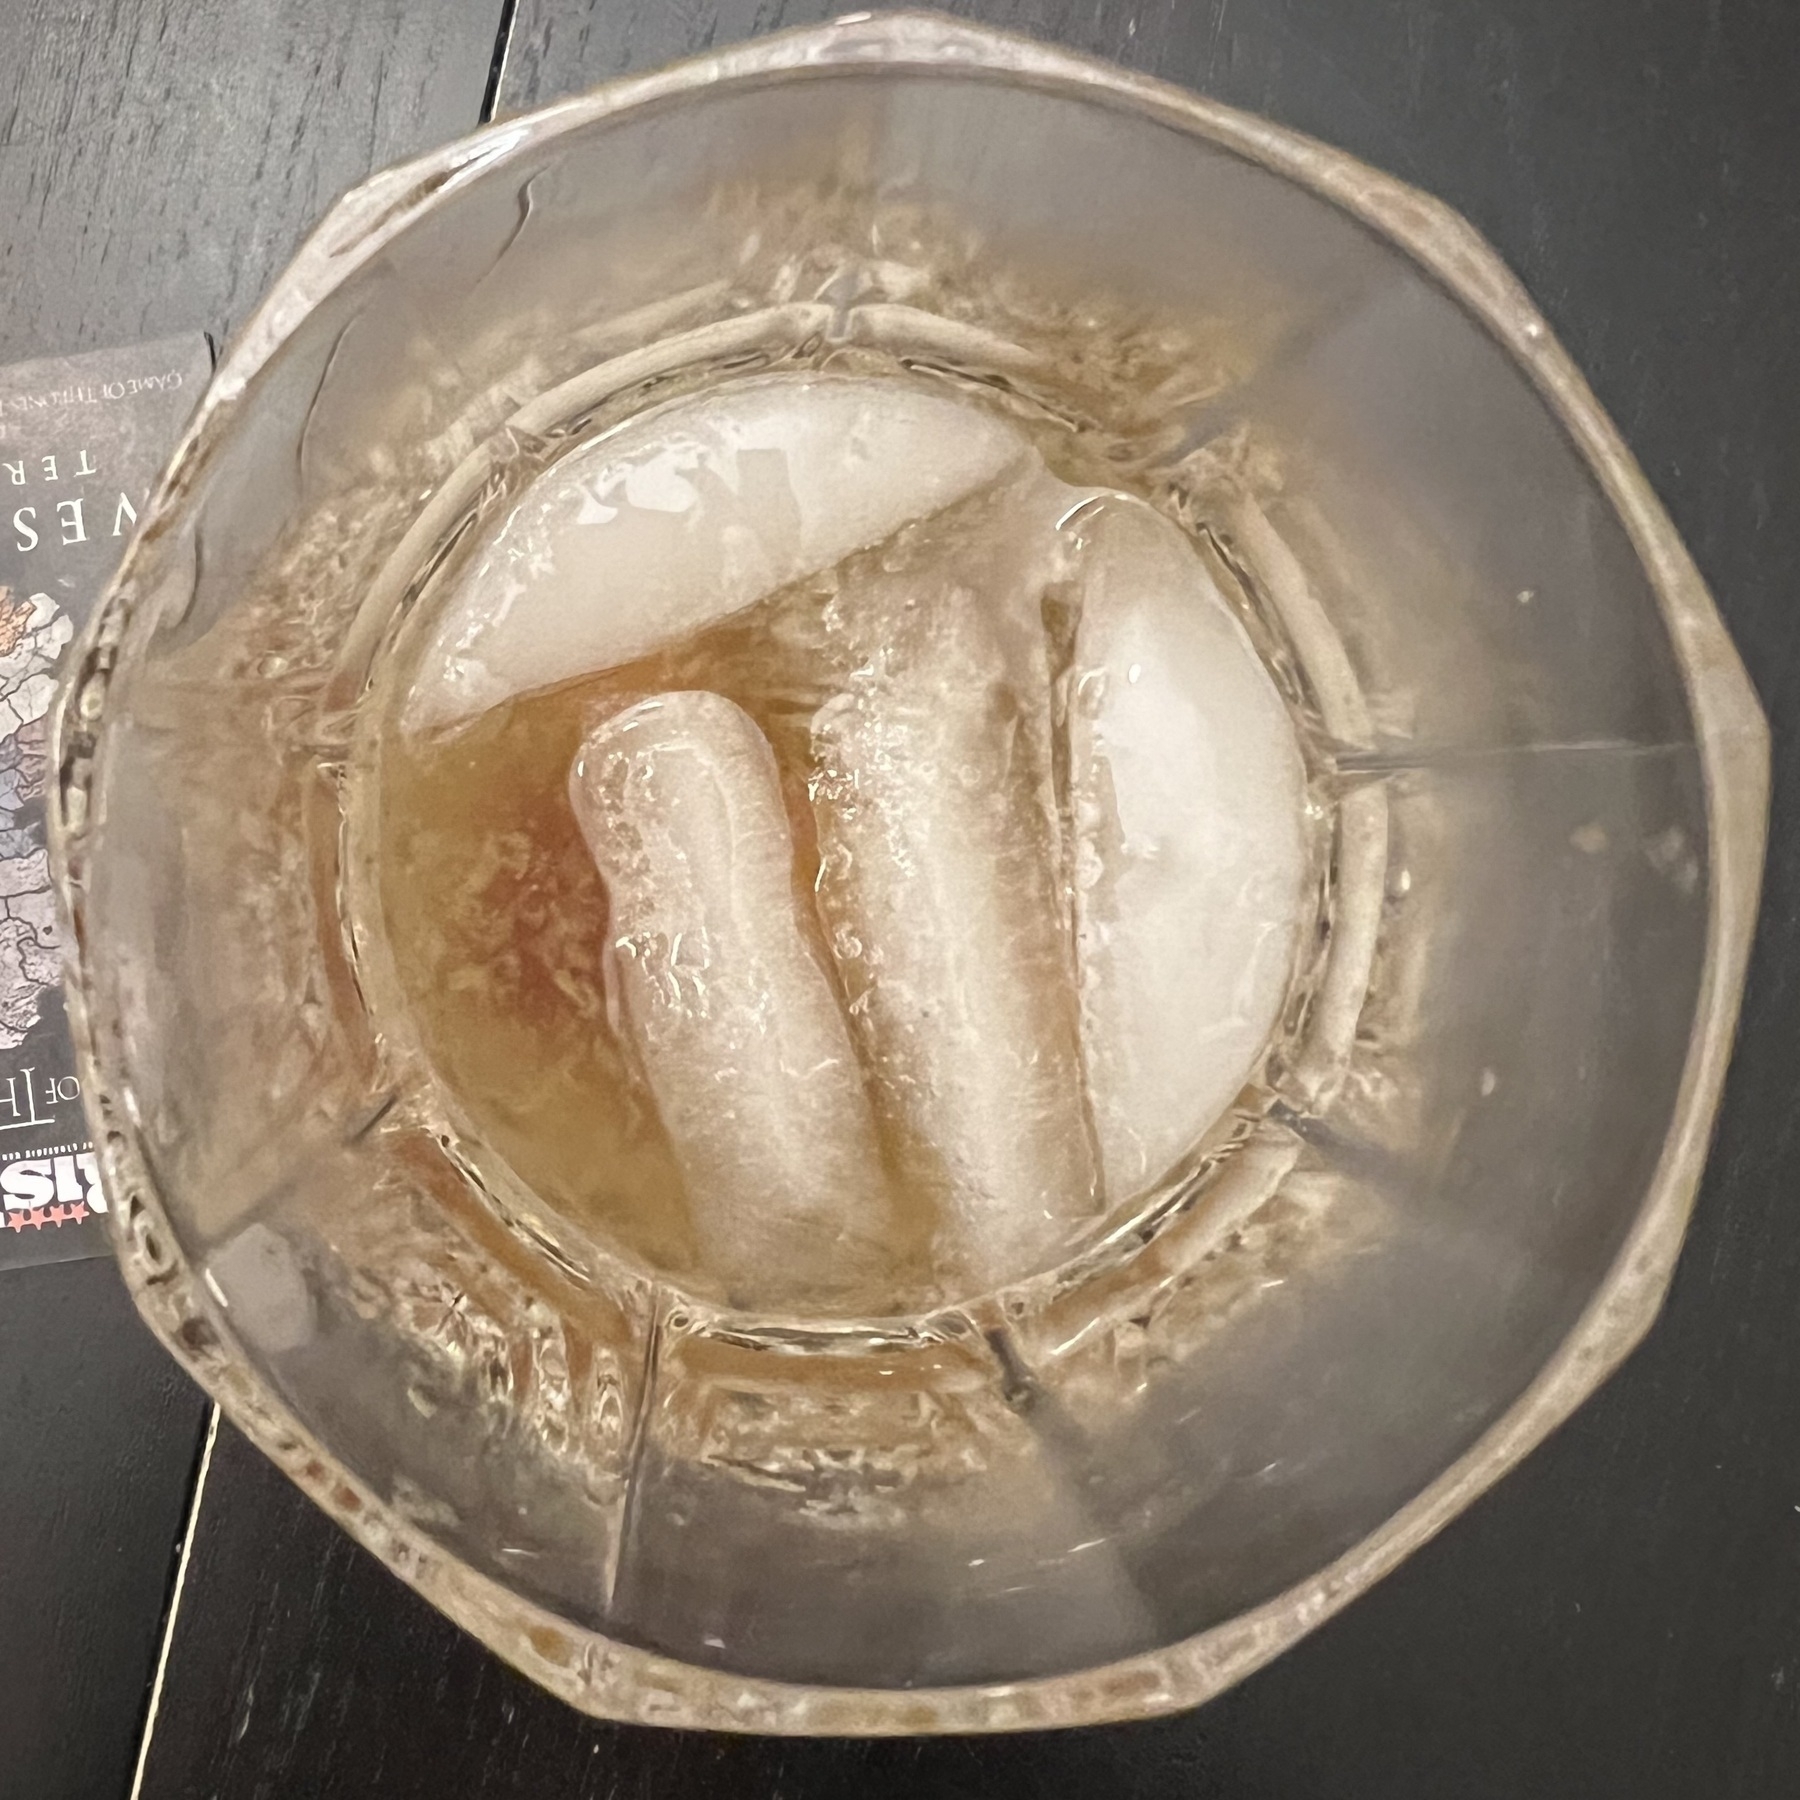 Top down view of a glass with ice and a alcoholic beverage in it. 